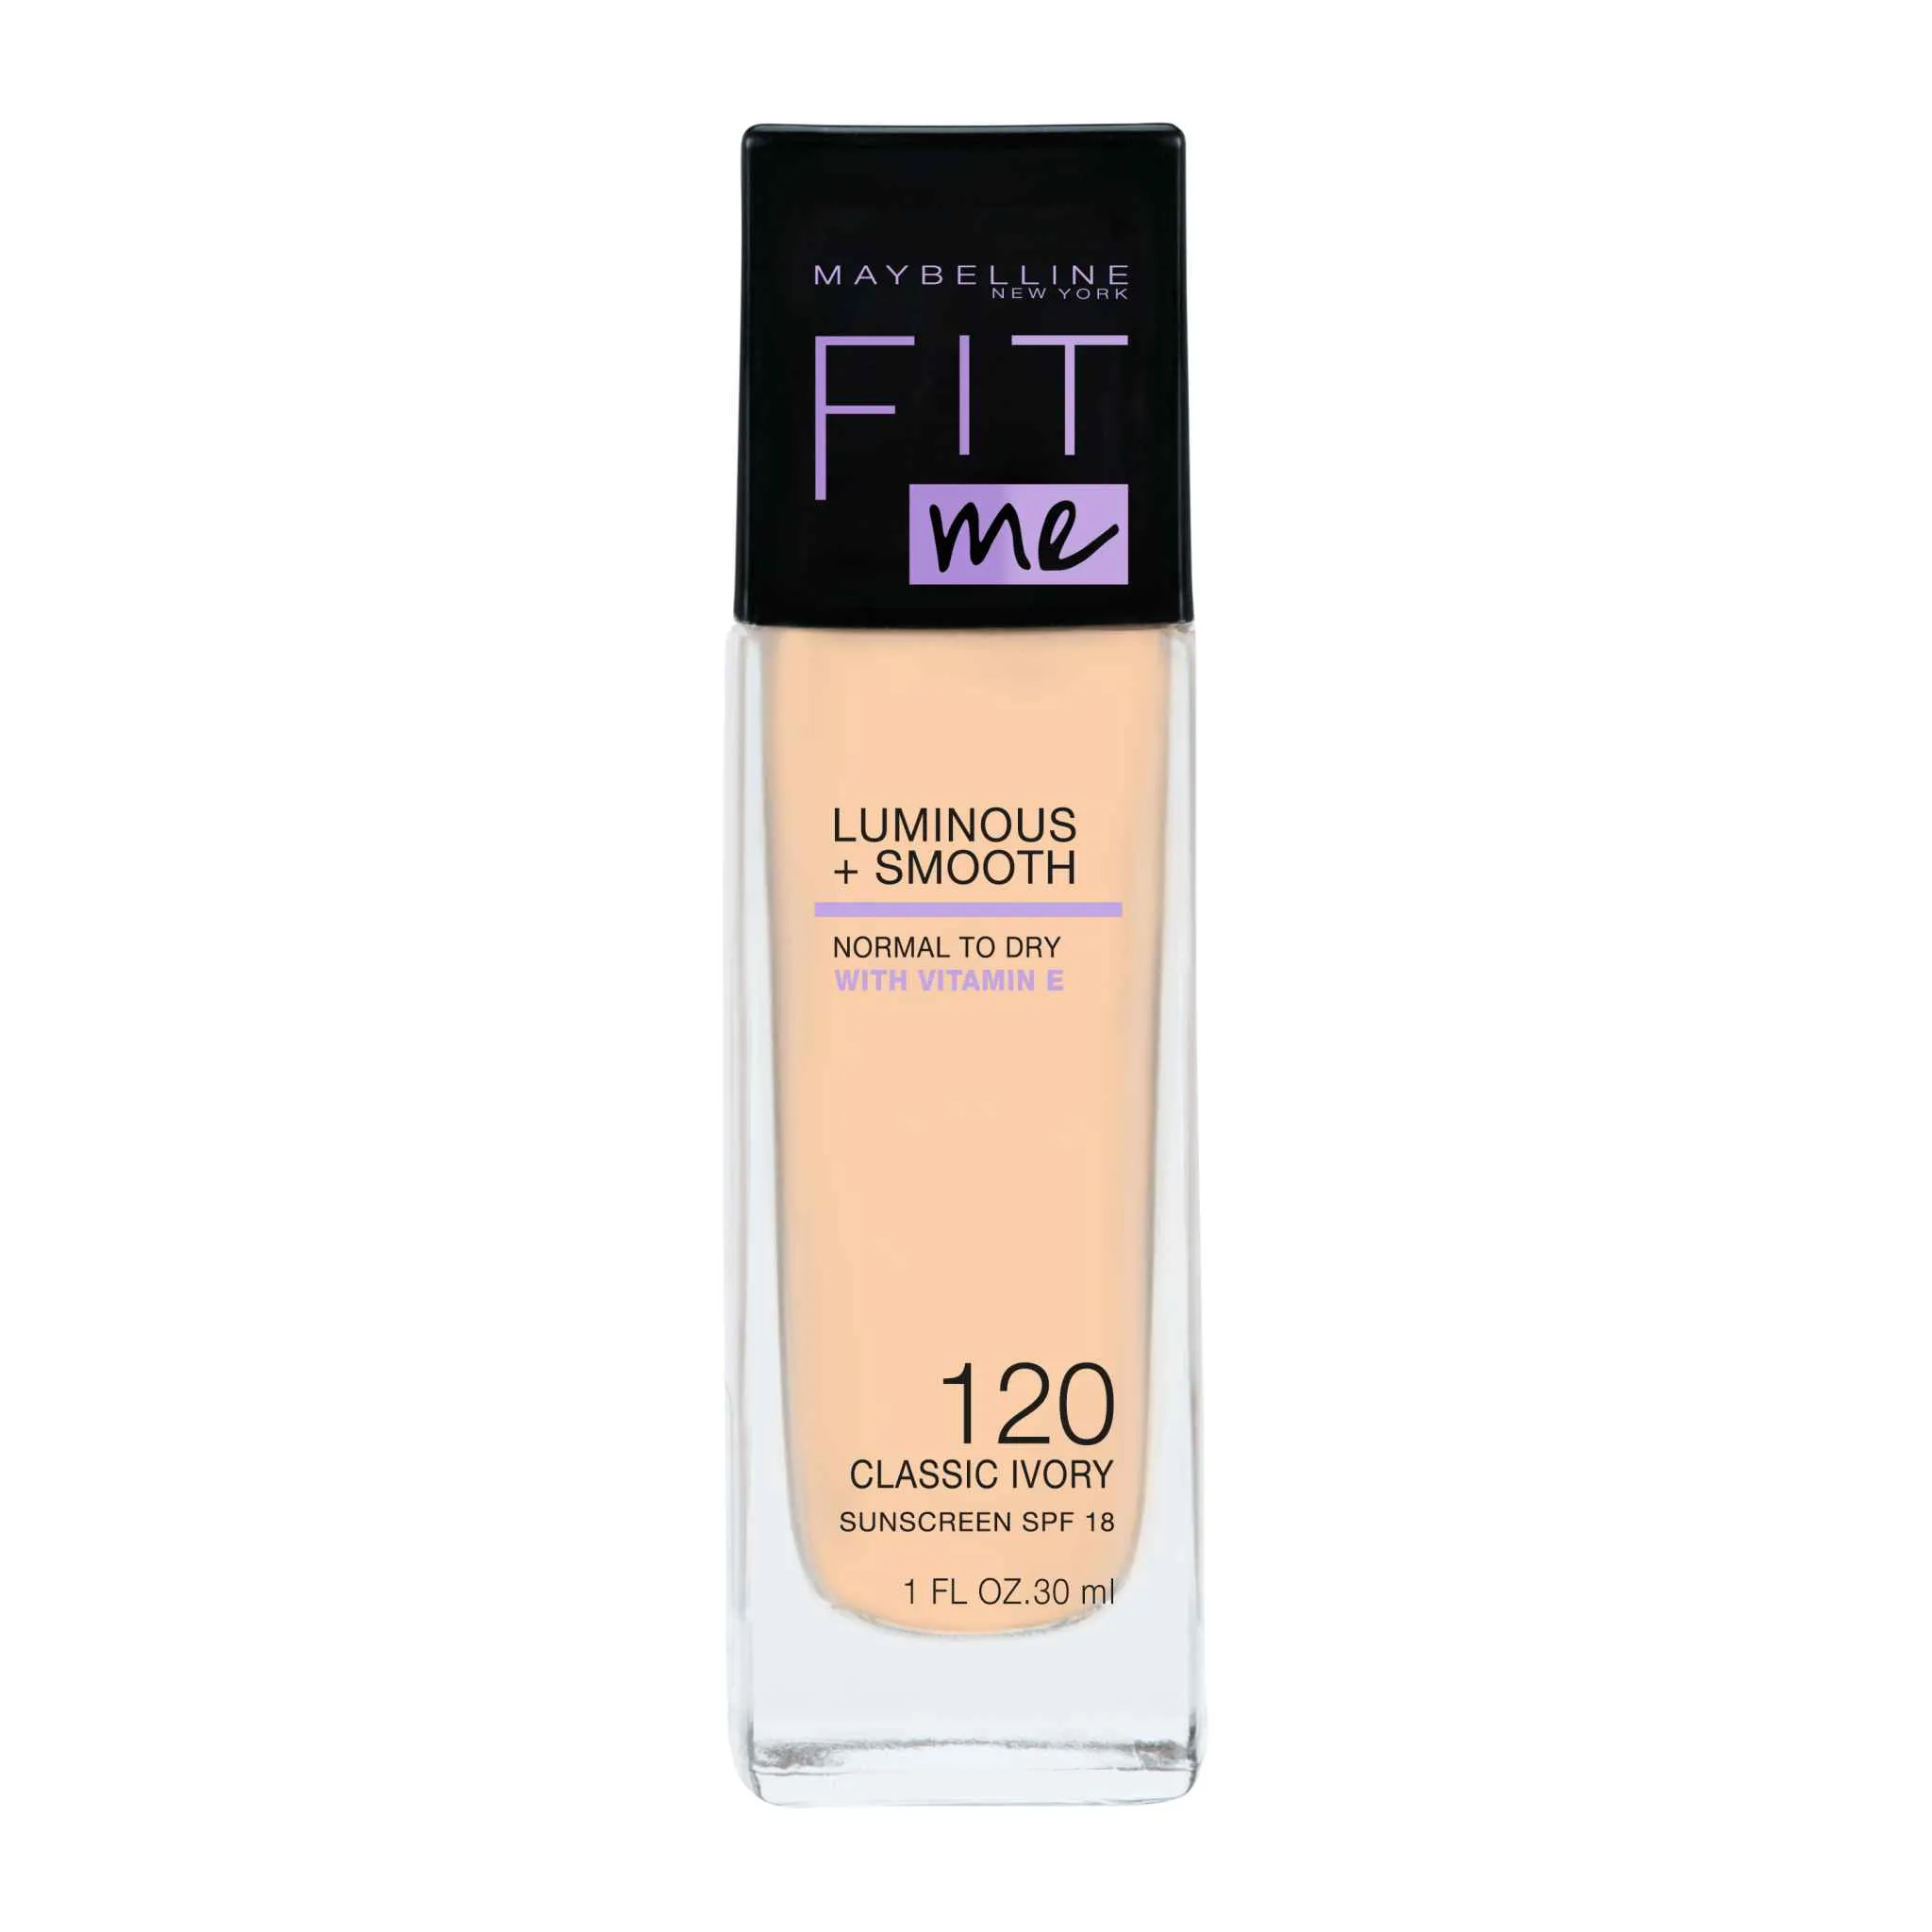 Maybelline New York Fit me Luminous + Smooth 120 Classic Ivory make-up 1×30 ml, make-up